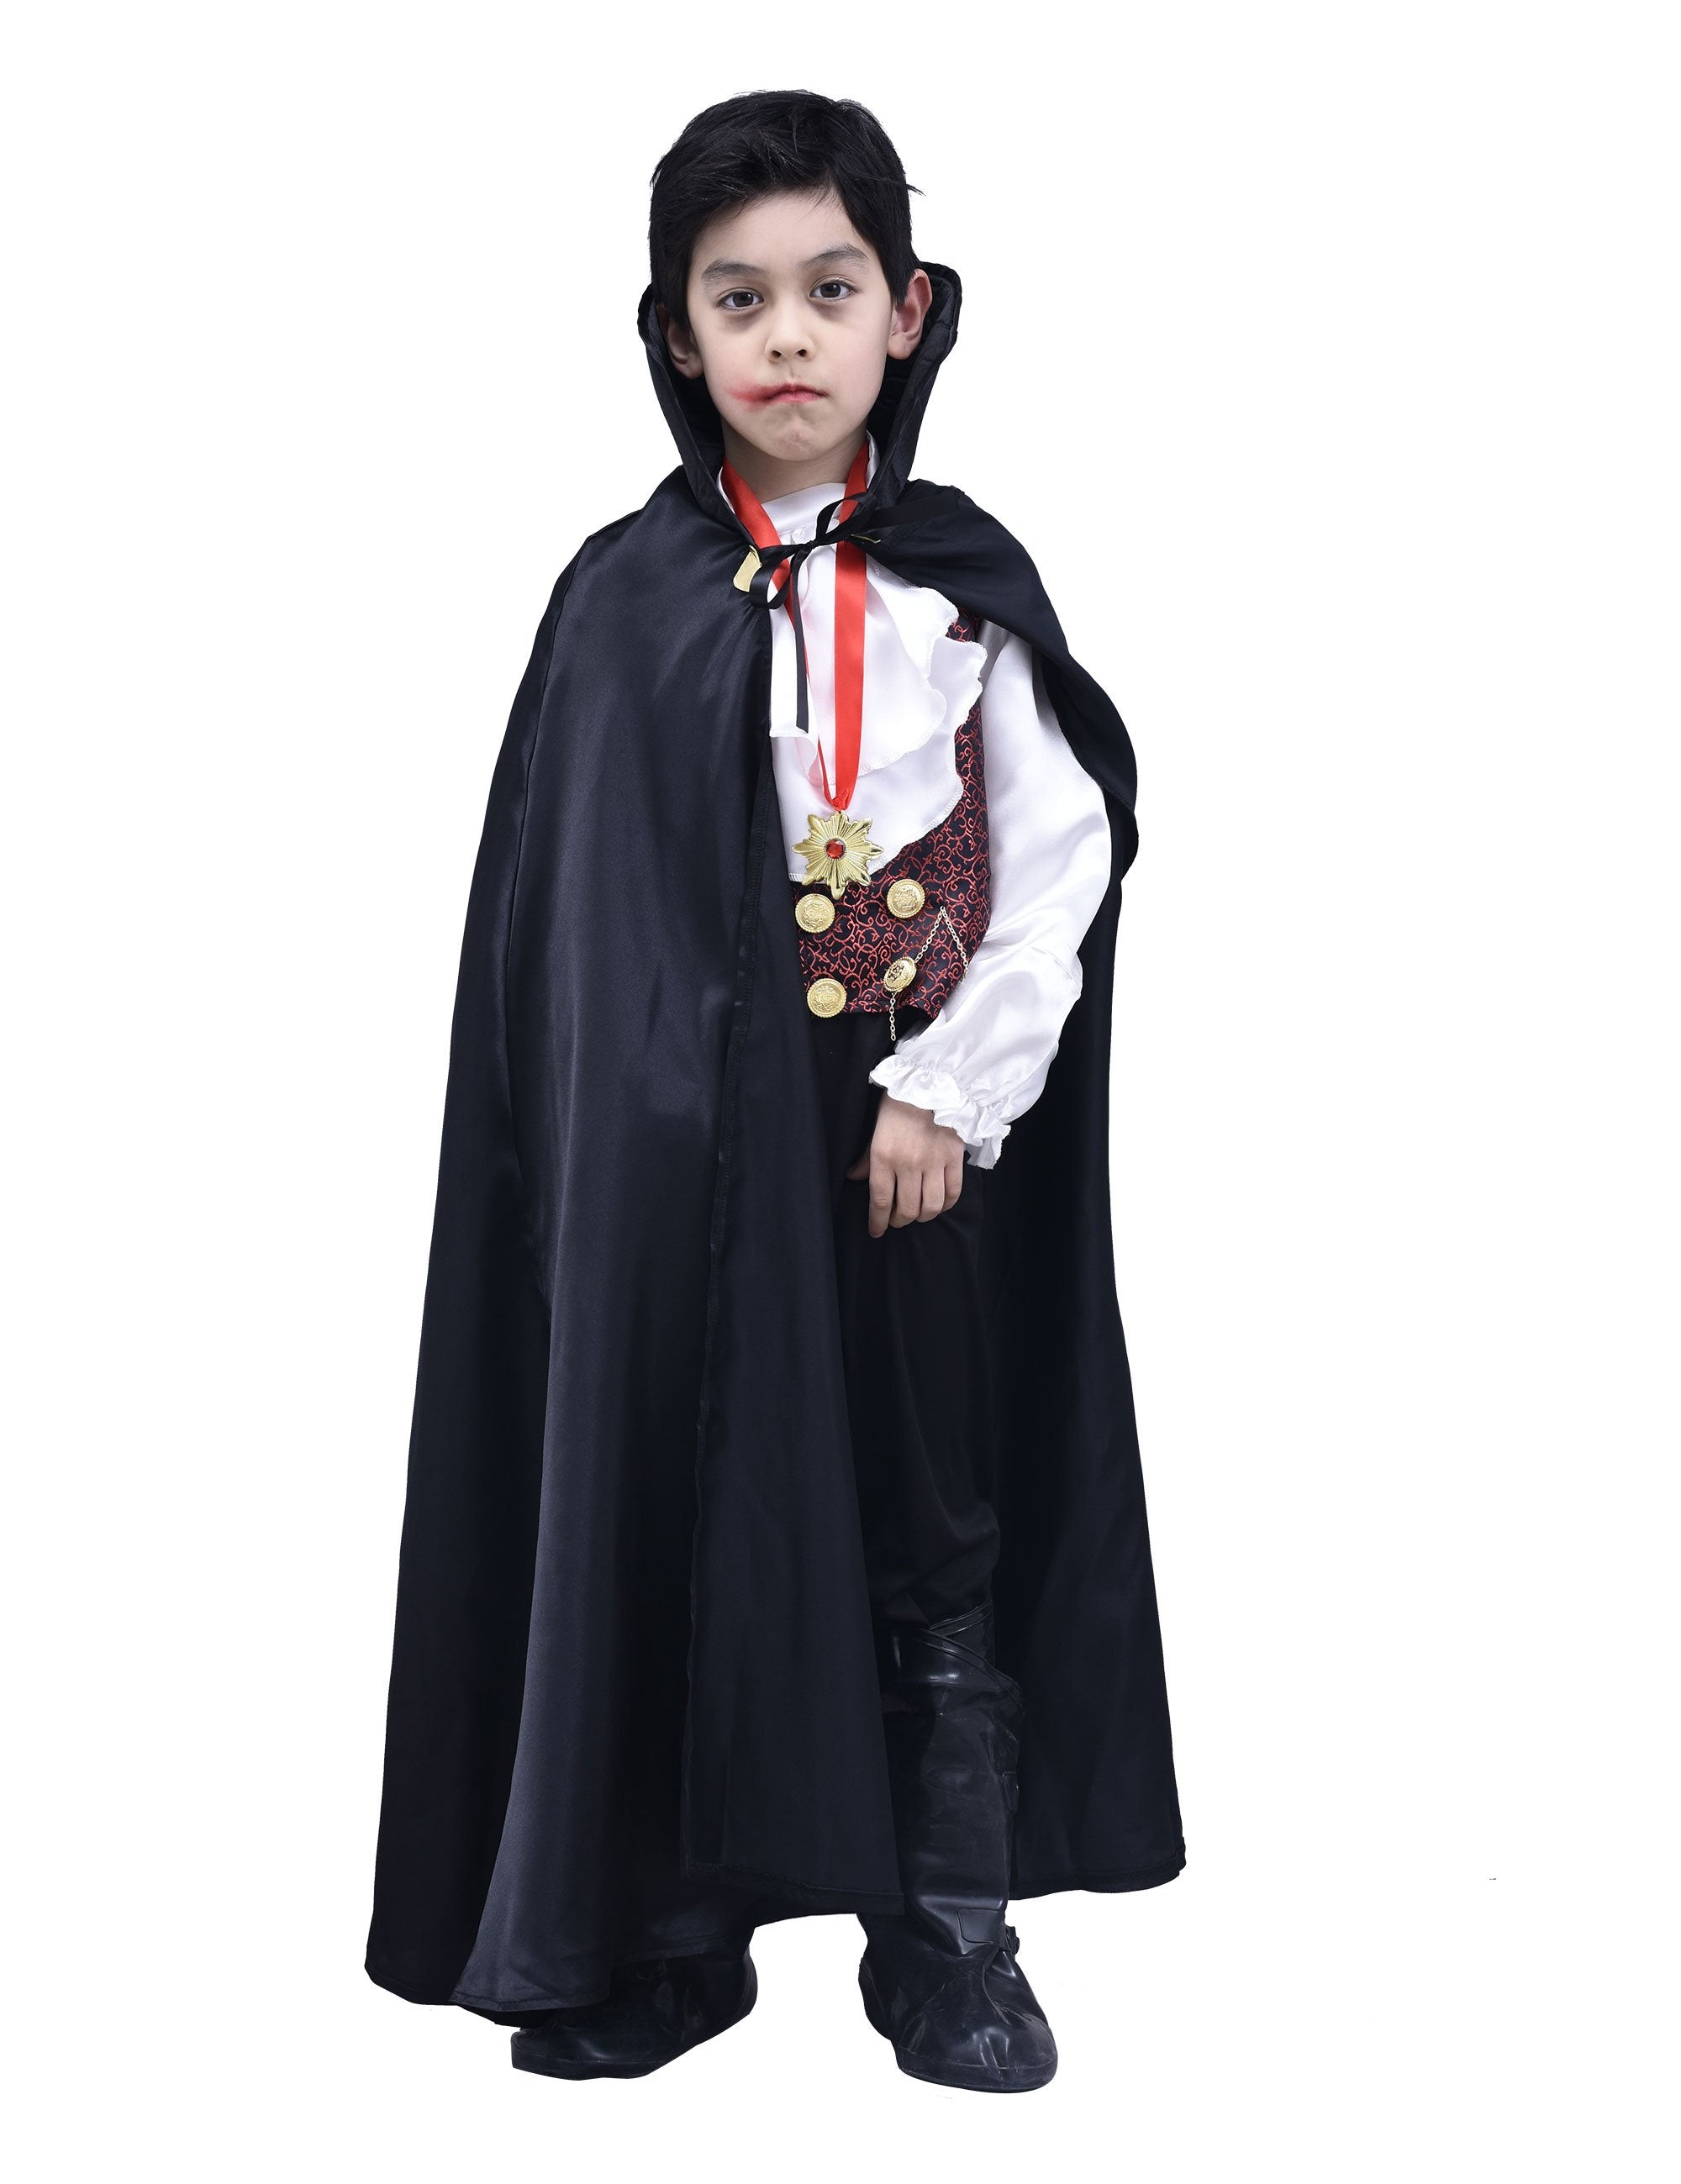 Girls Vampire Costume, Princess Masquerade Party for Halloween Party